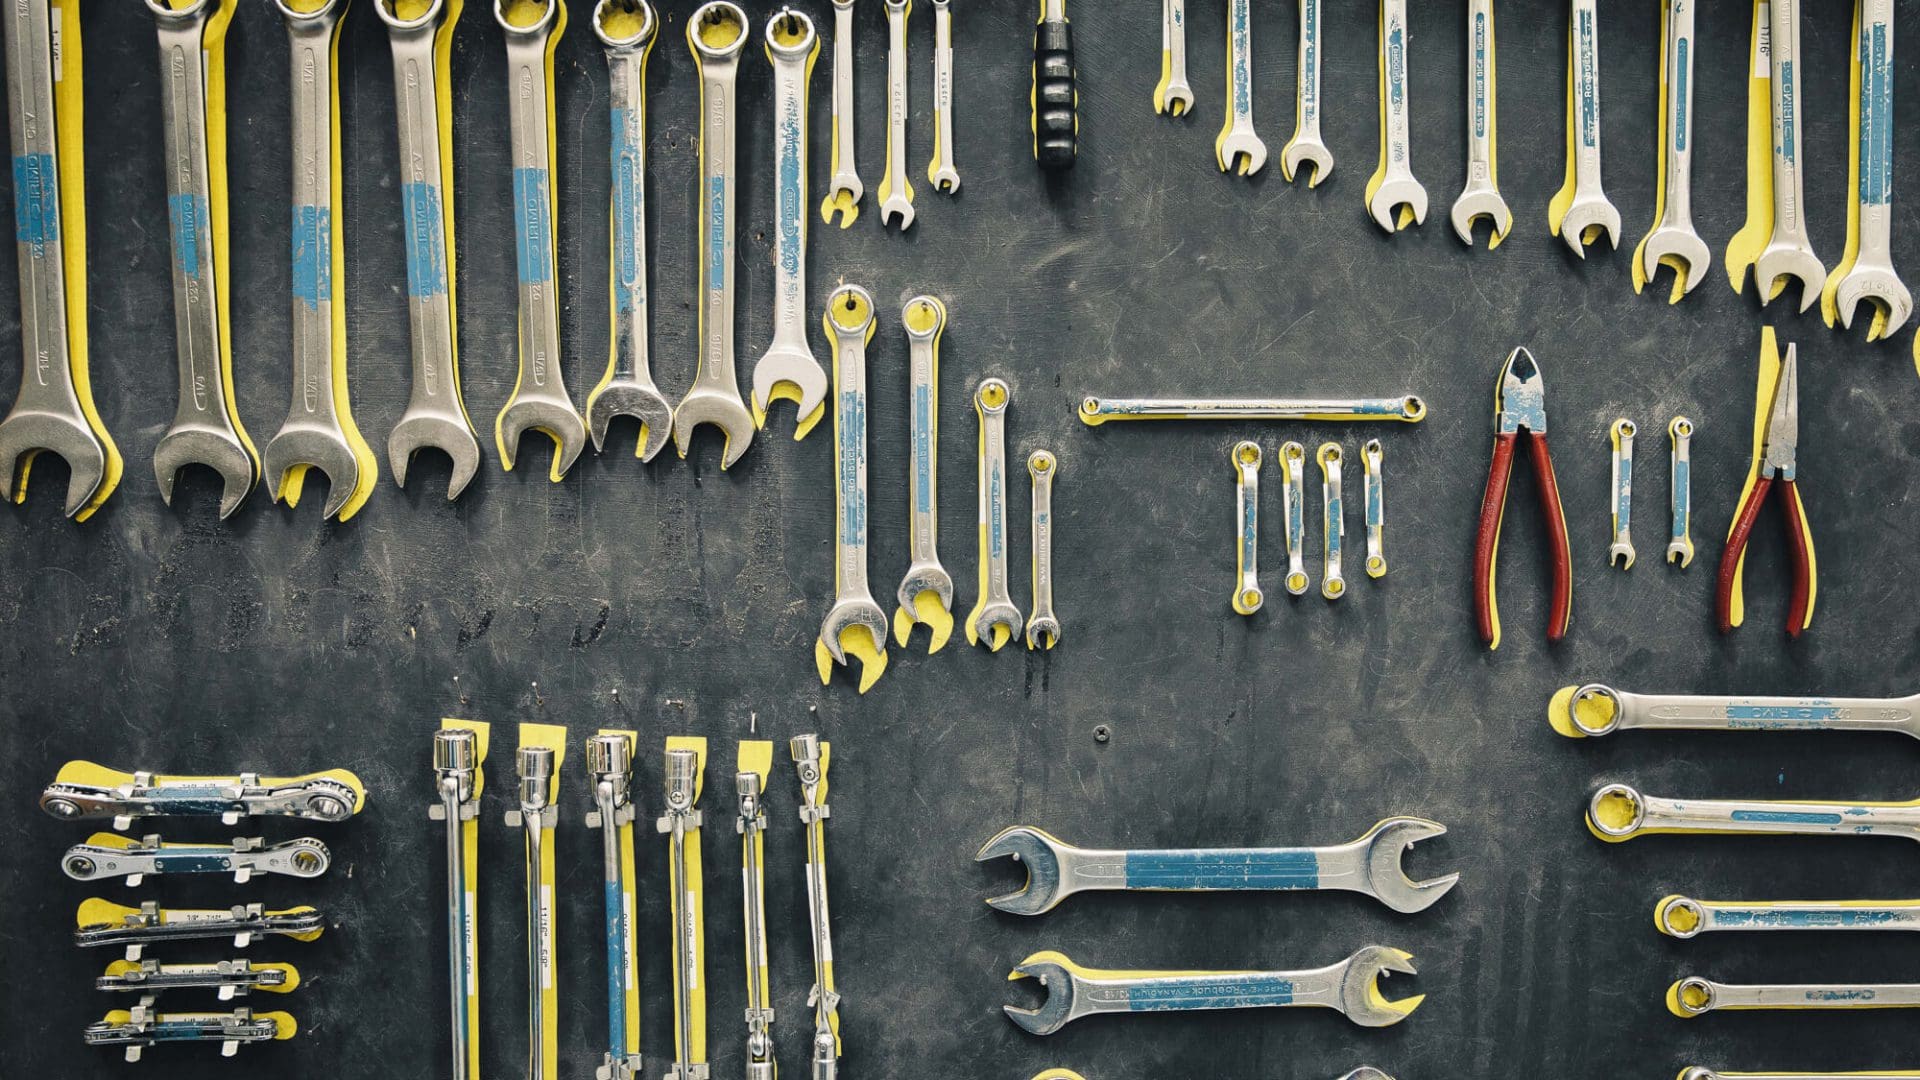 Wrenches and pliers hang up on a wall - tools for engineering courses in Bristol